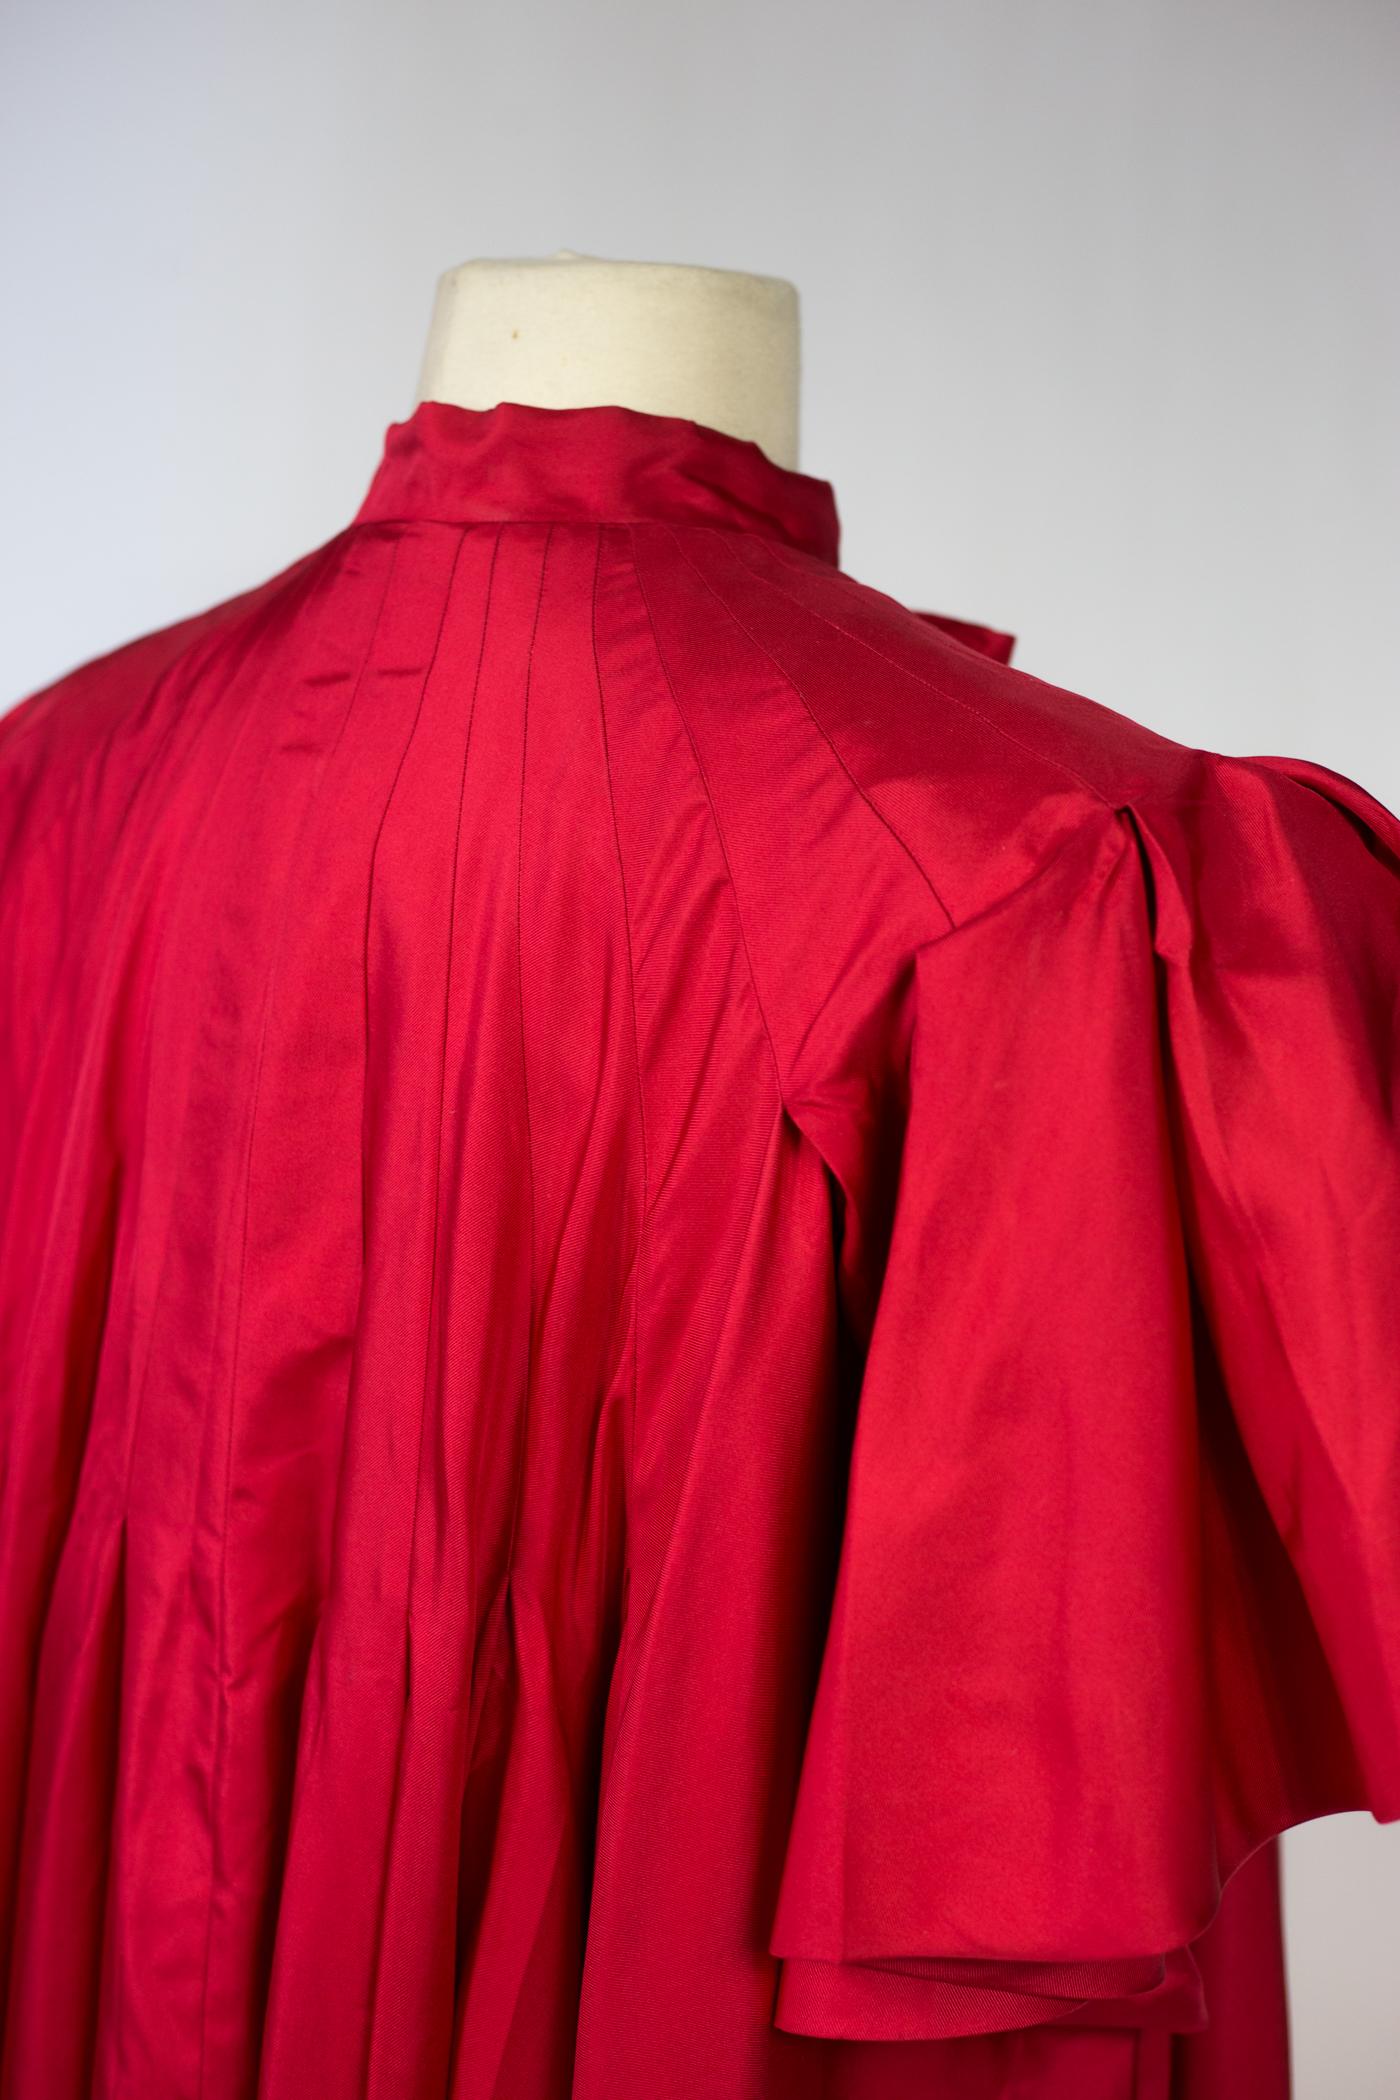 An Evening Maggy Rouff French Haute Couture Red Silk Coat Circa 1955 5